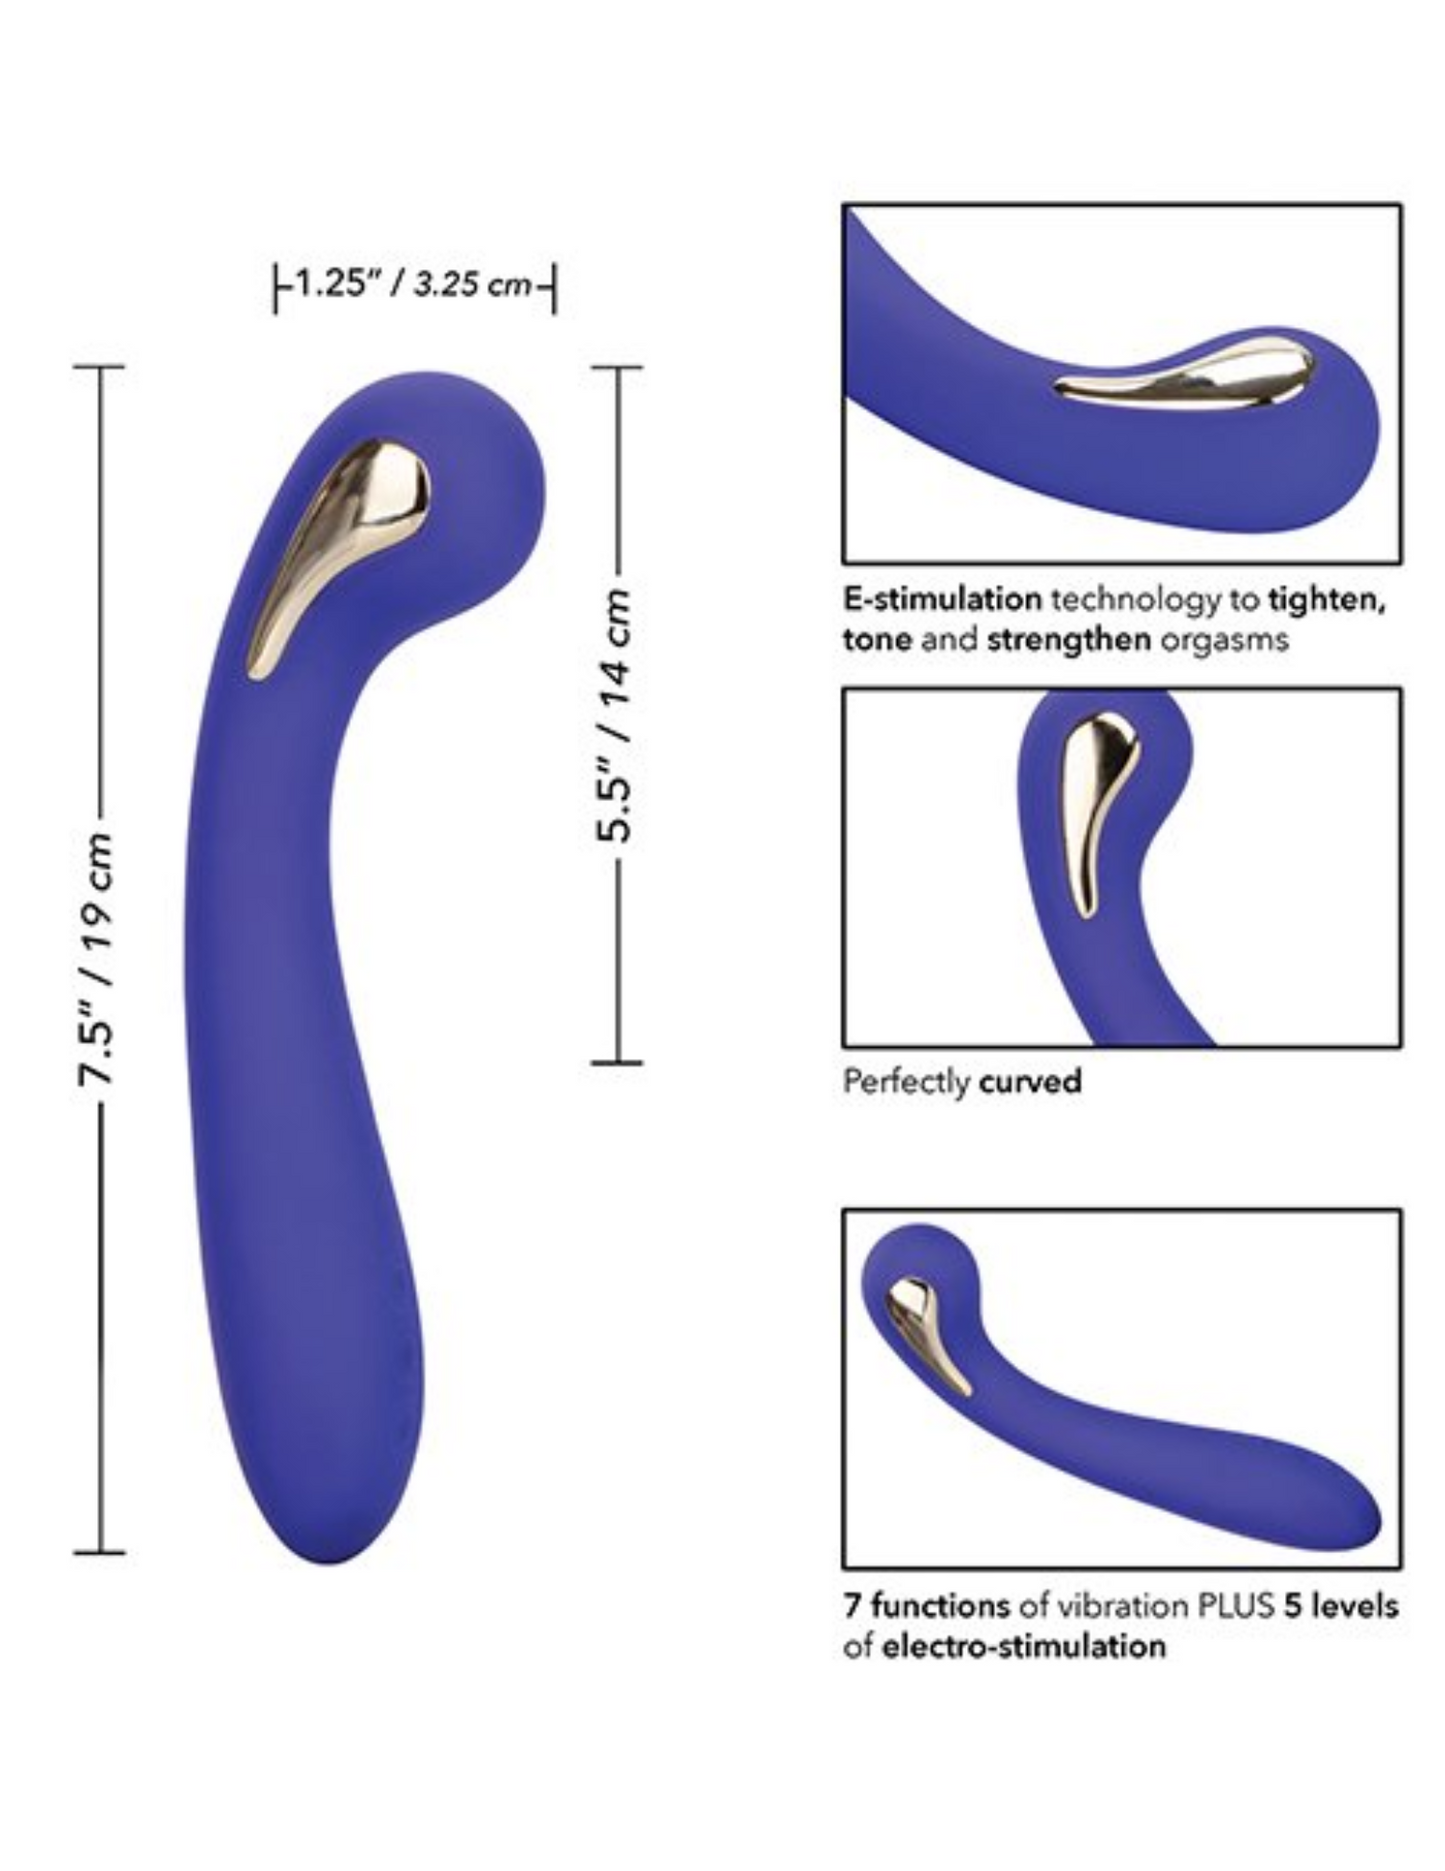 Image shows the dimensions of the Impulse Intimate E-Stimulator Petite G Wand Vibrating Wand Massager, from CalExotics.